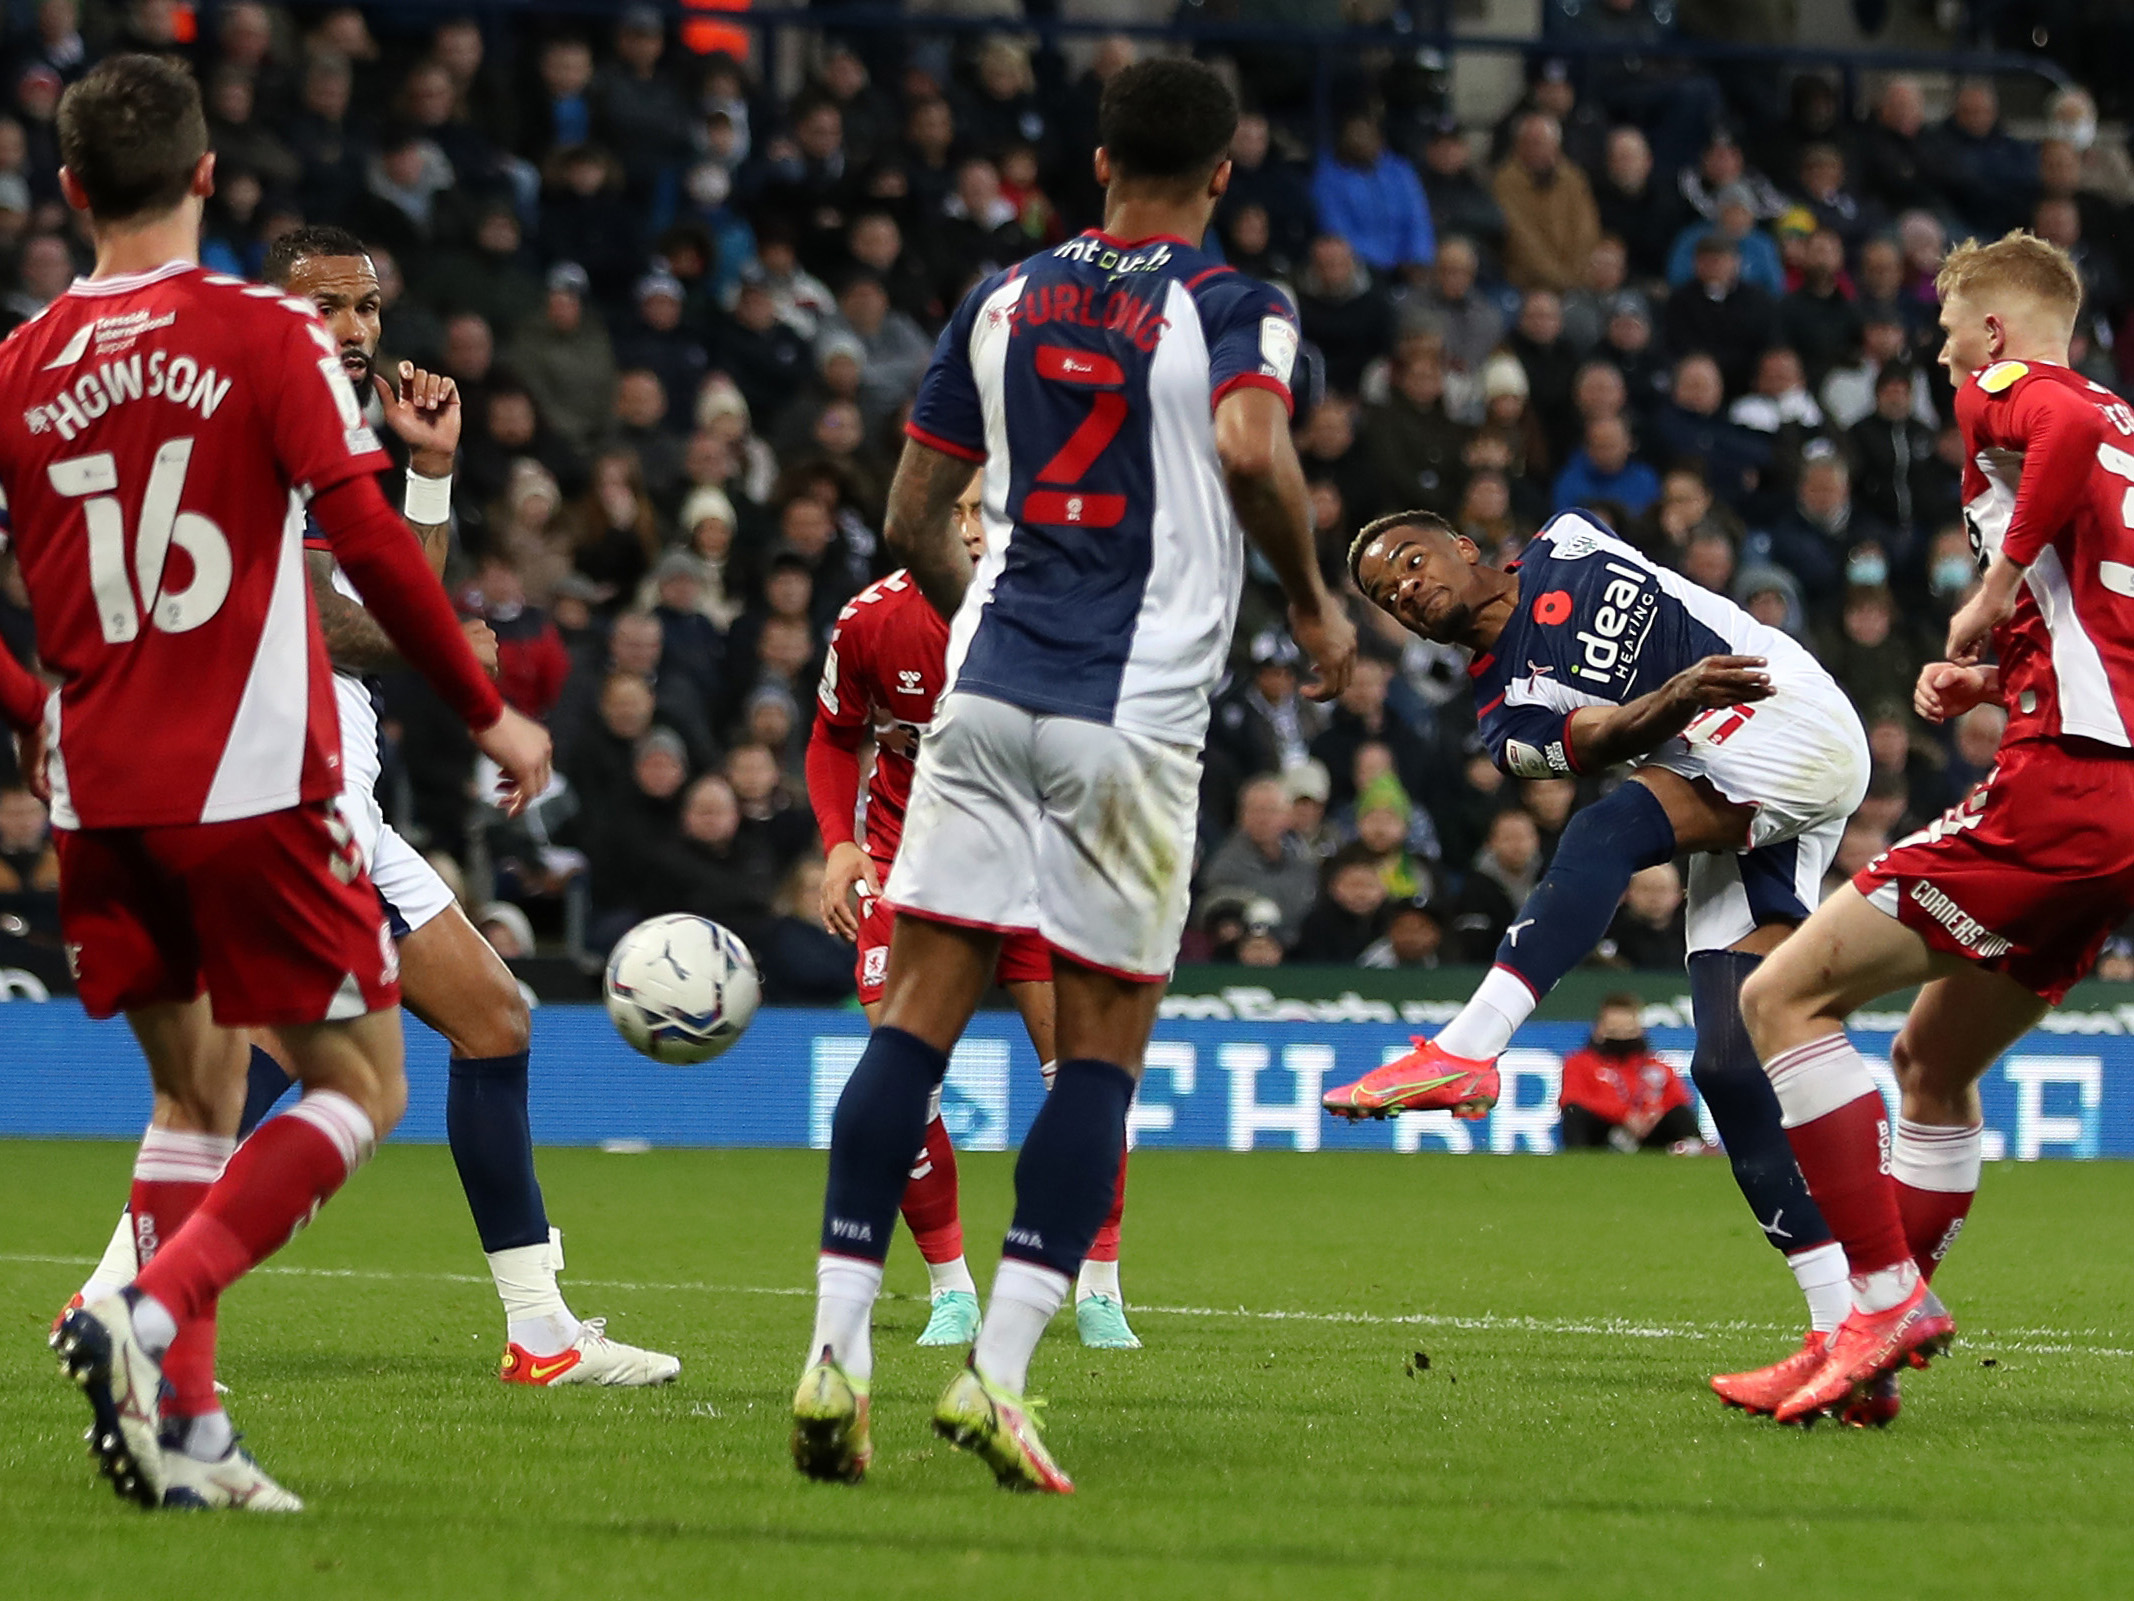 Diangana equalises against Middlesbrough